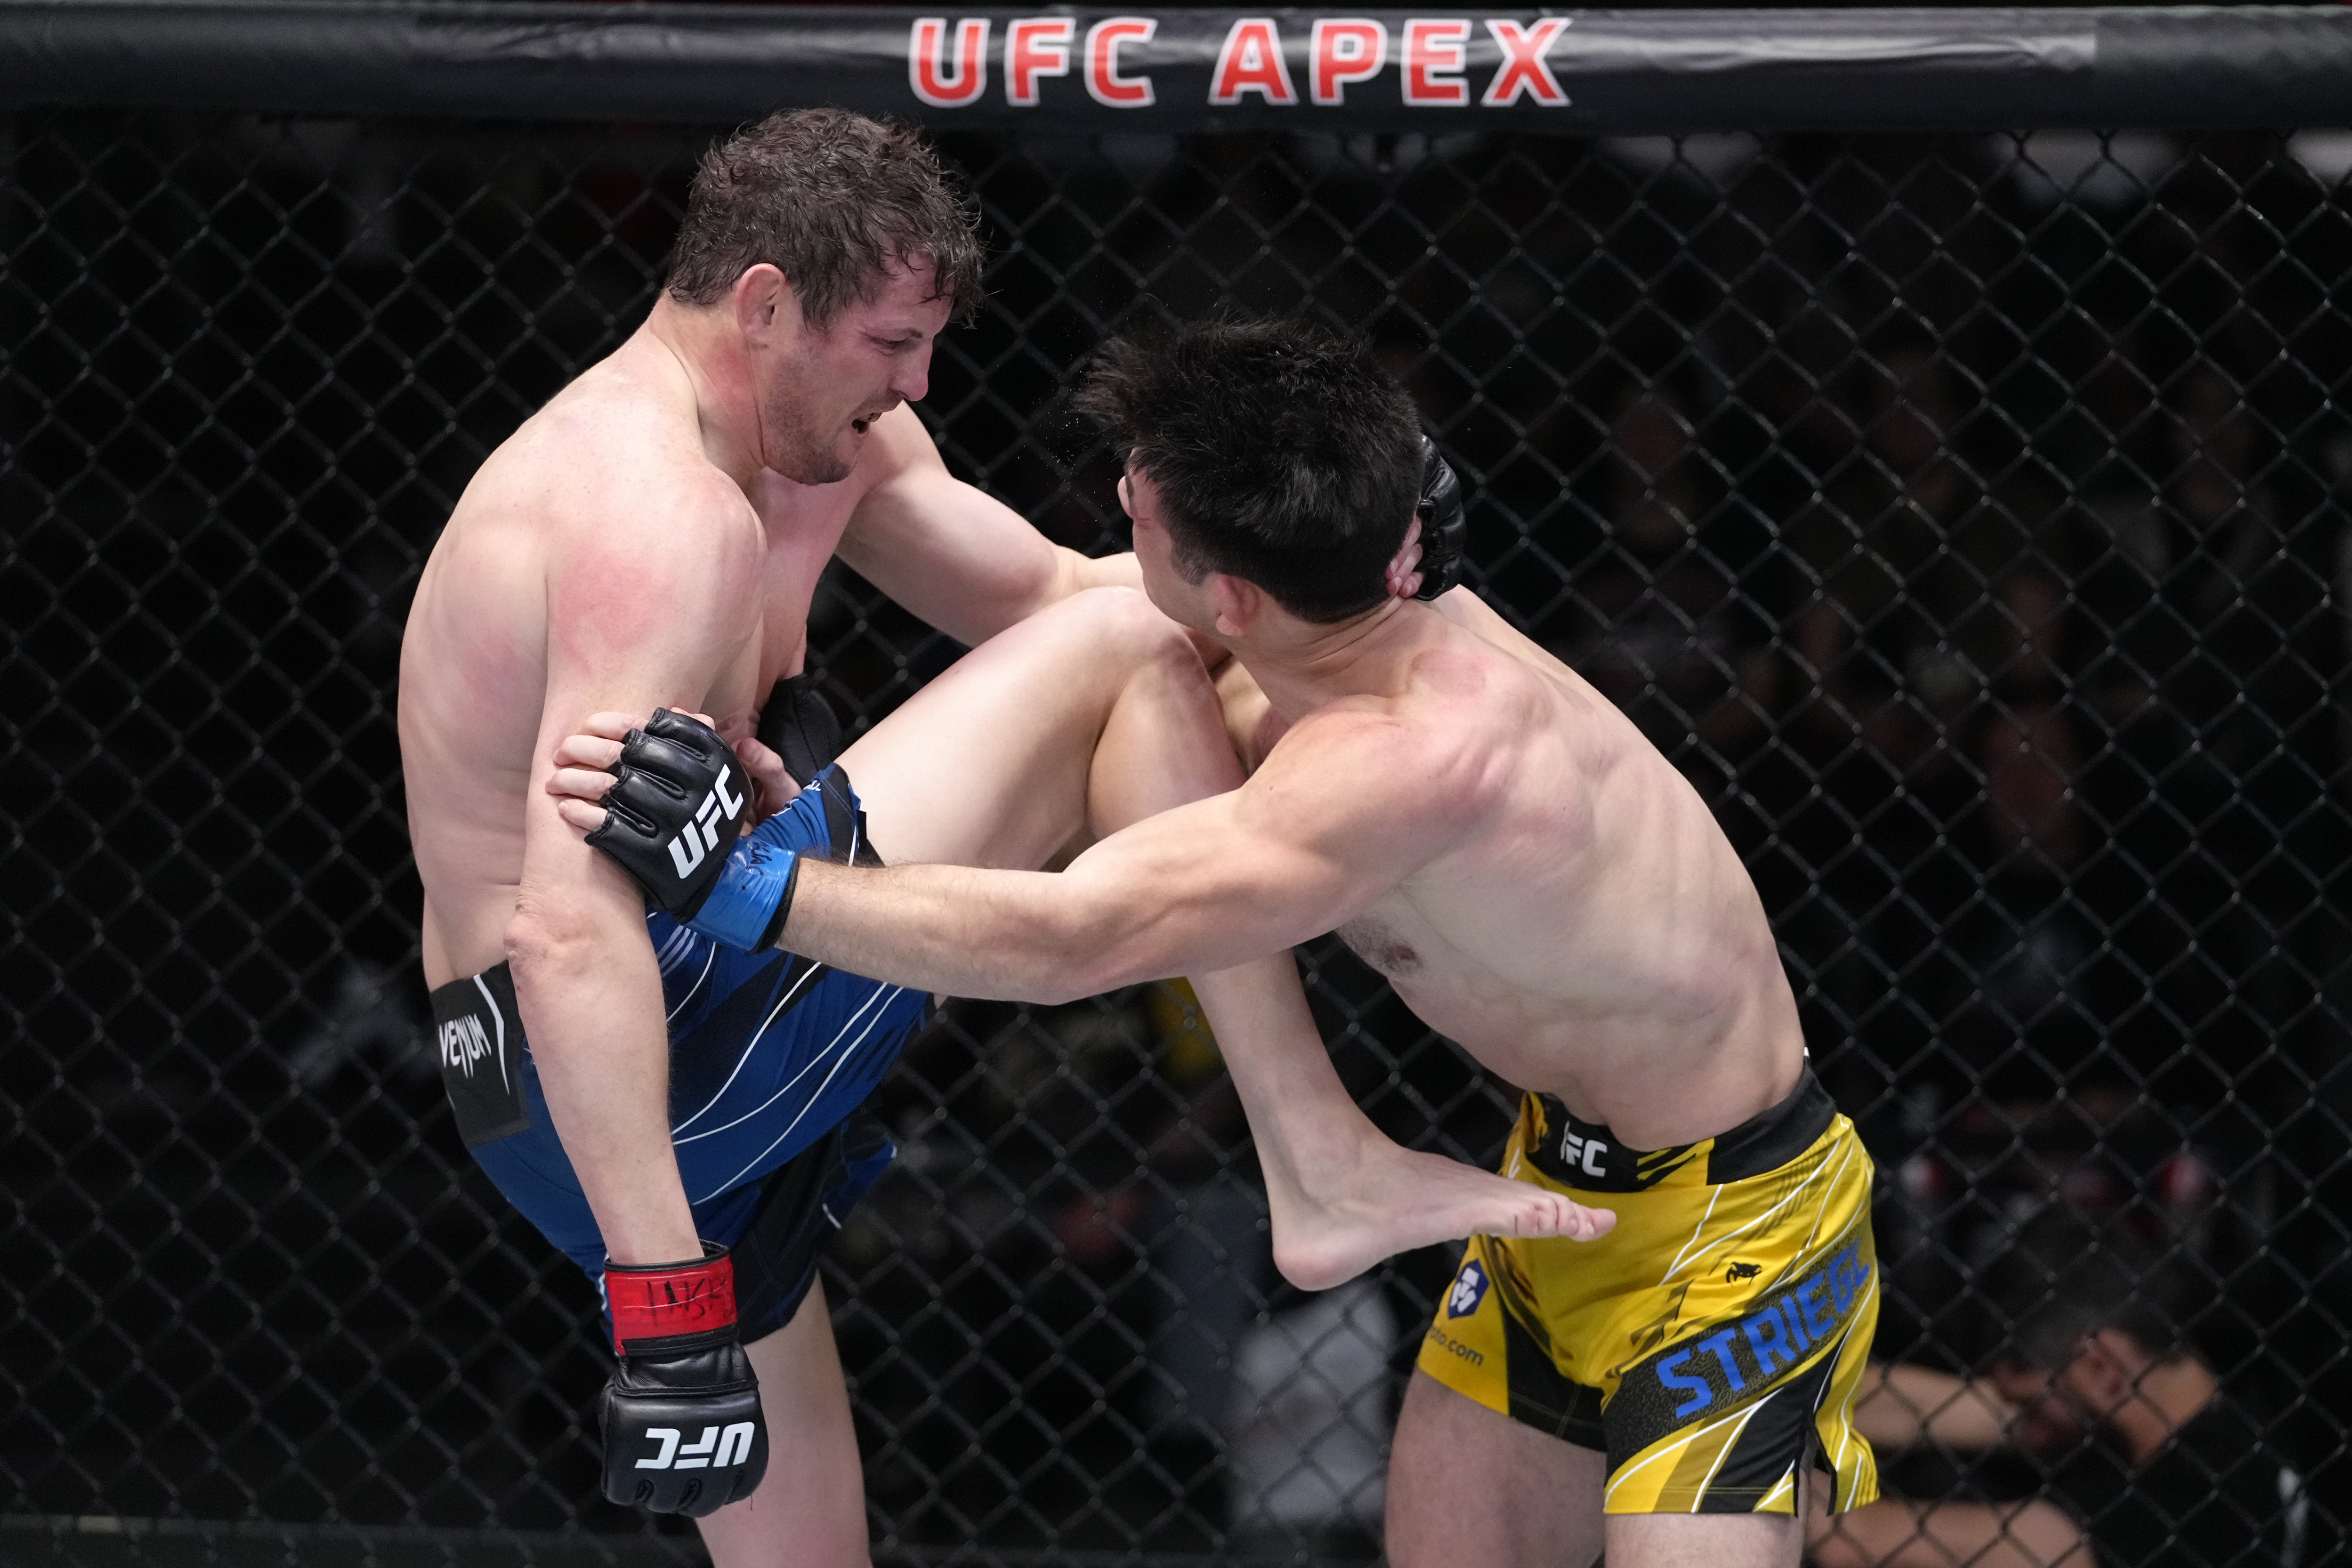 Chas Skelly finished Mark Striegl in his final MMA fight at UFC Vegas 48